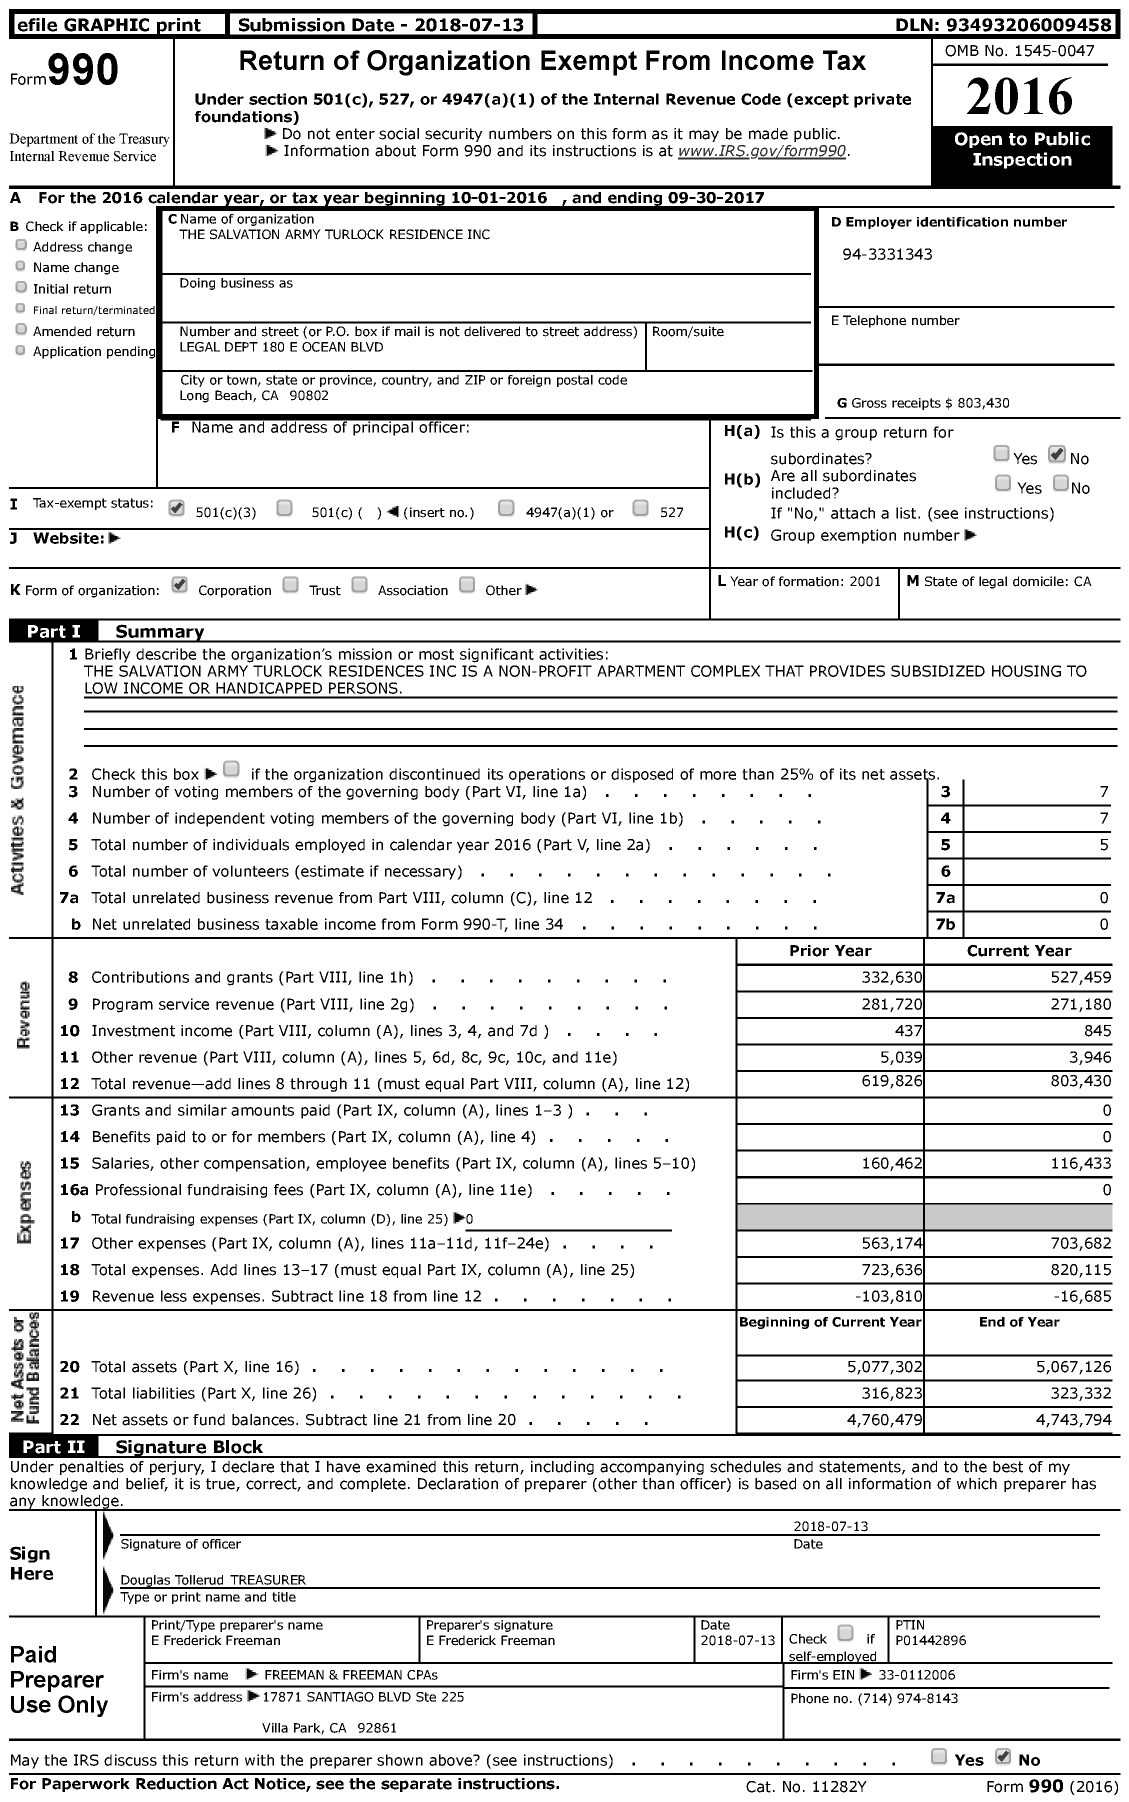 Image of first page of 2016 Form 990 for The Salvation Army Turlock Residence